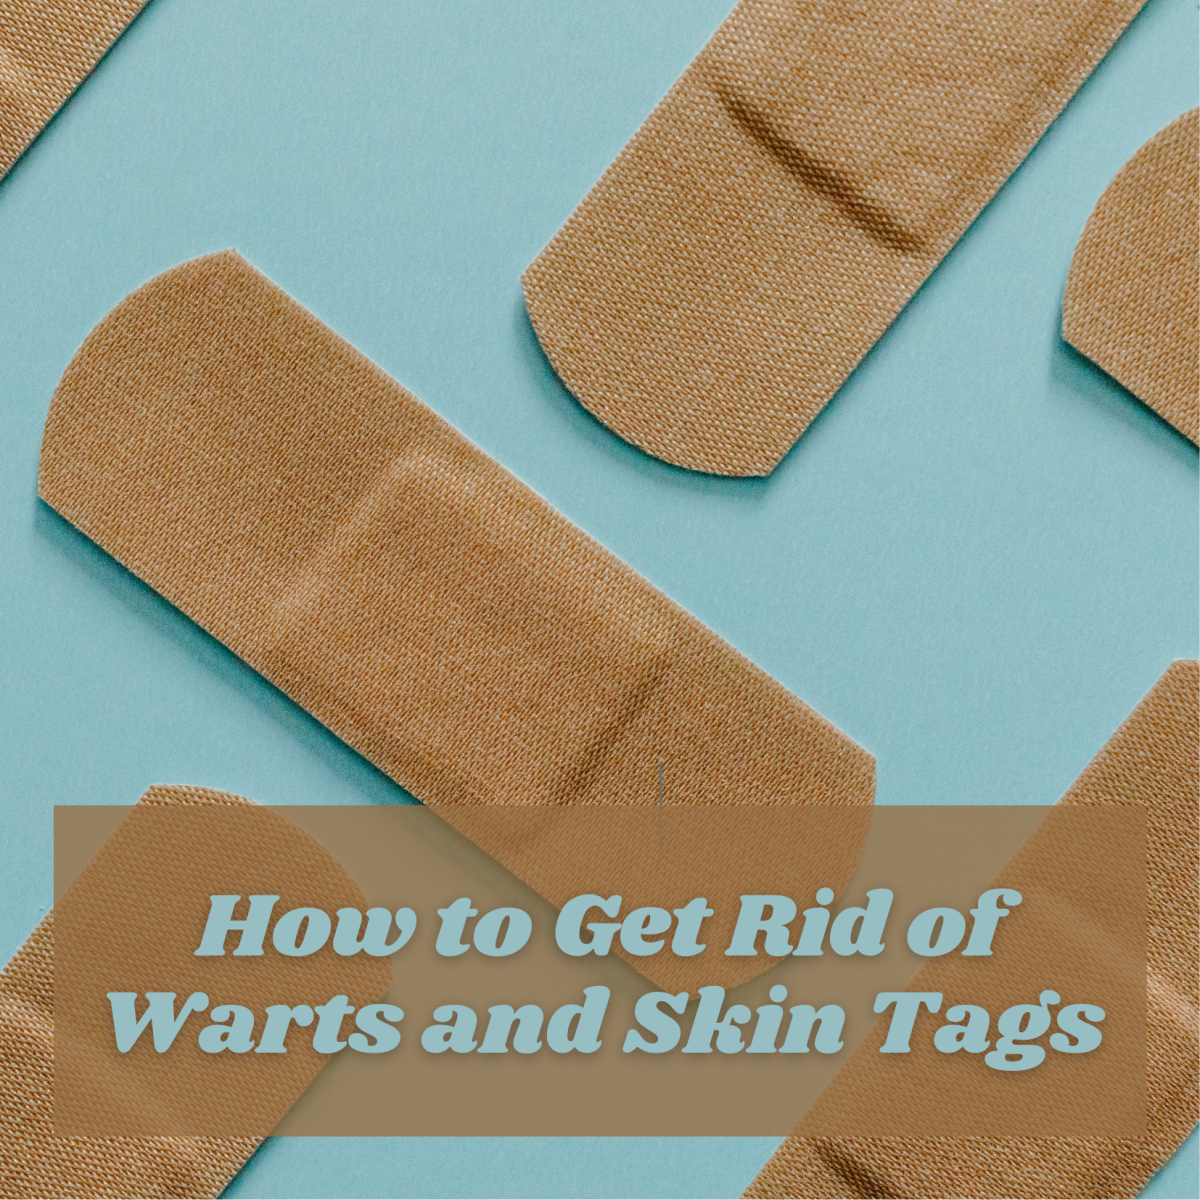 Don't just cover unsightly warts and skin tags—remove them!